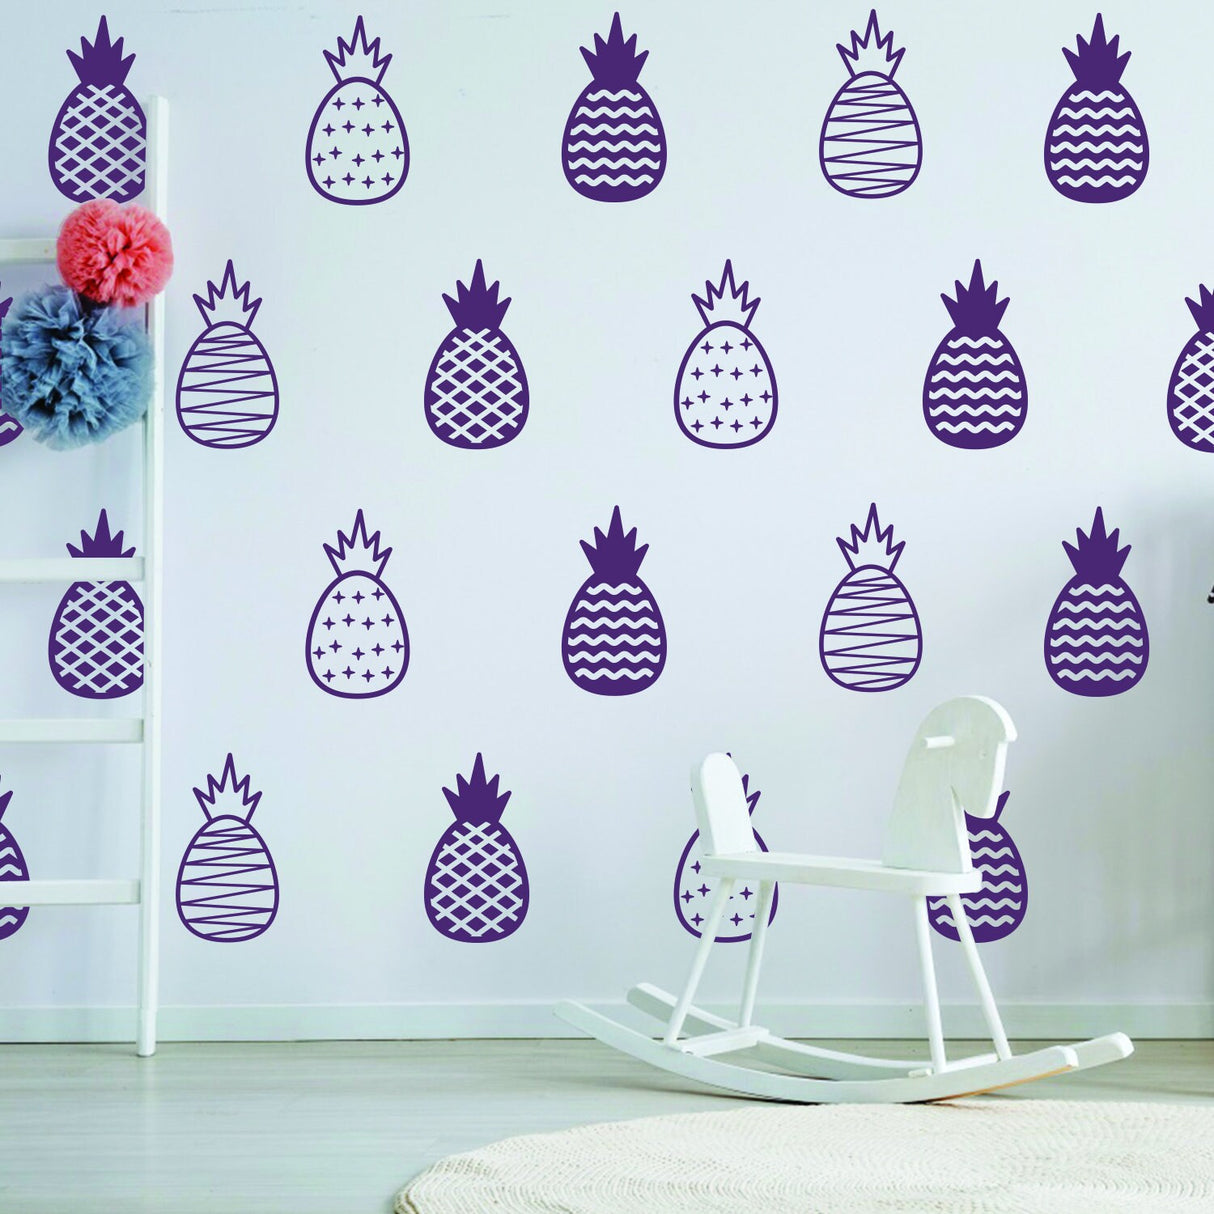 50x Pineapple Wall Decals - Gold Decor Decal Bedroom Sticker